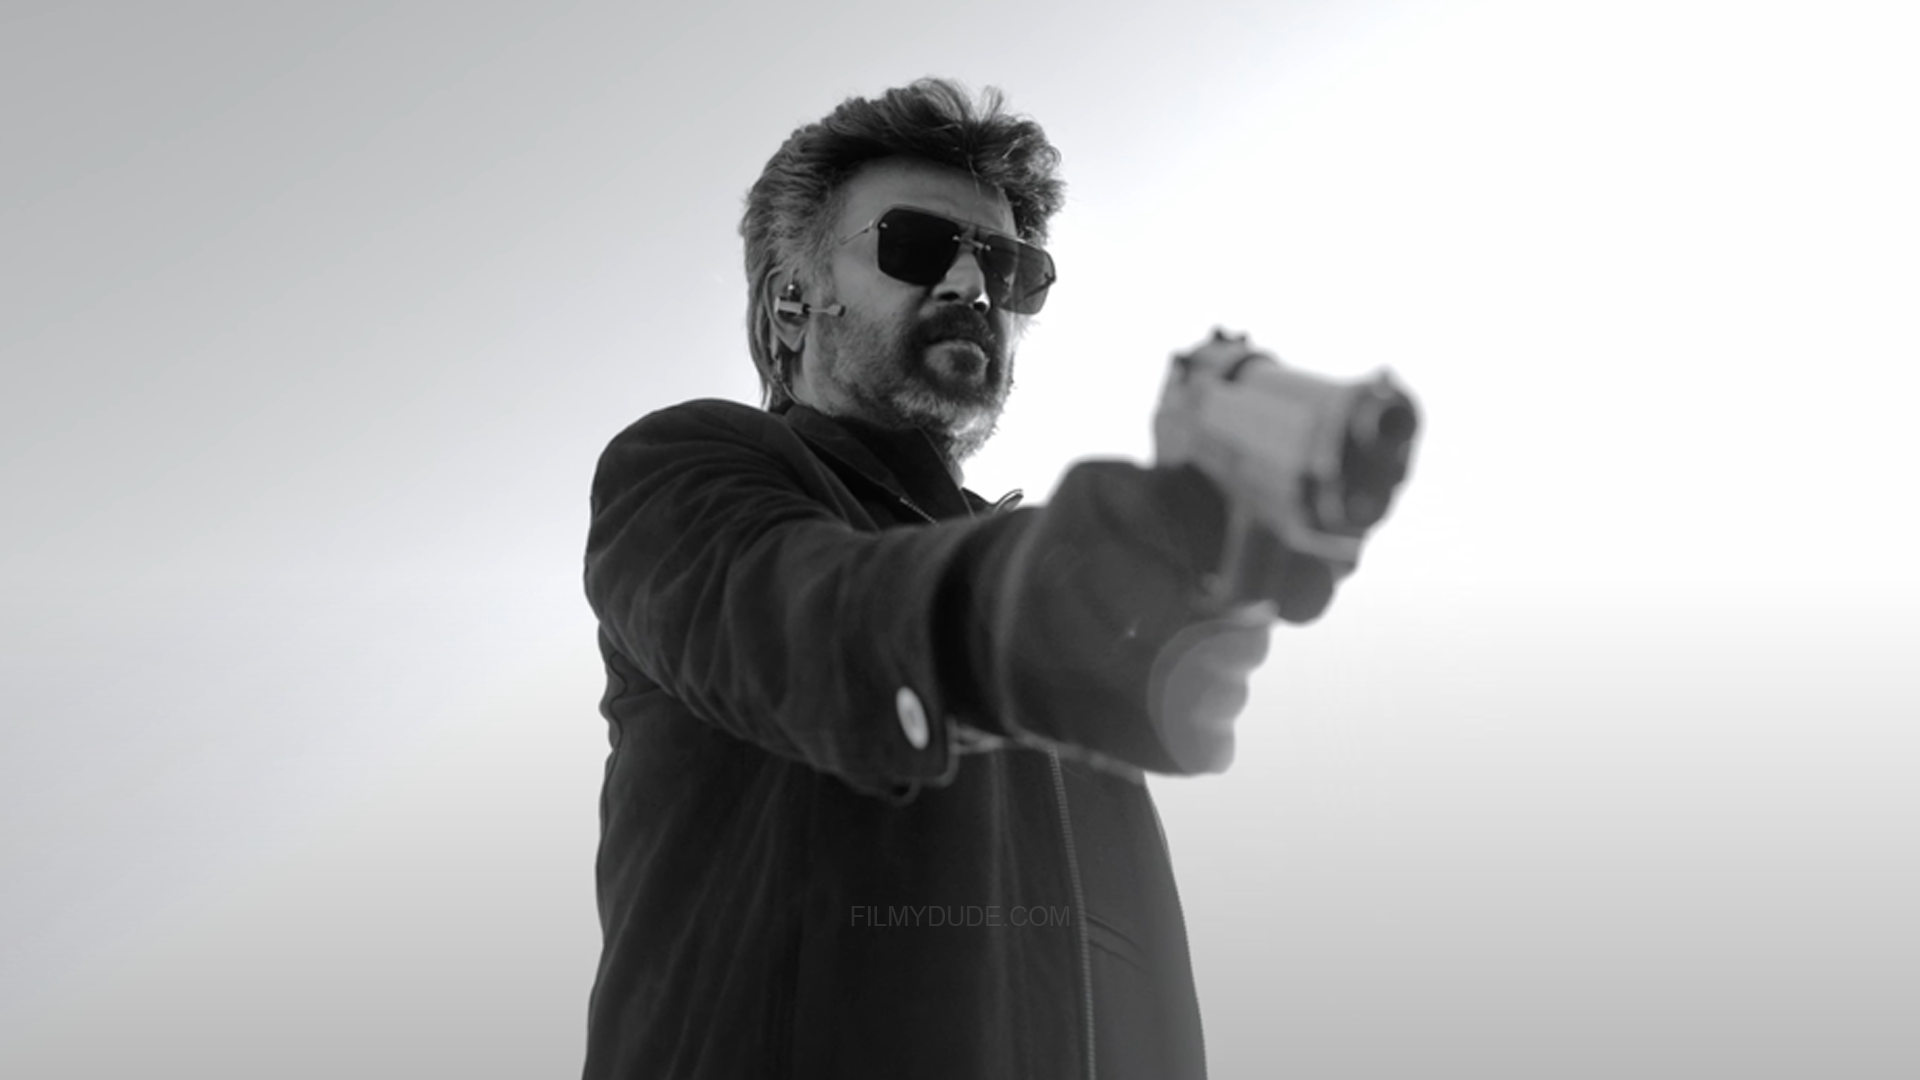 Jailer Song Hukum Out- Rajinikanth Returns In His Iconic Form